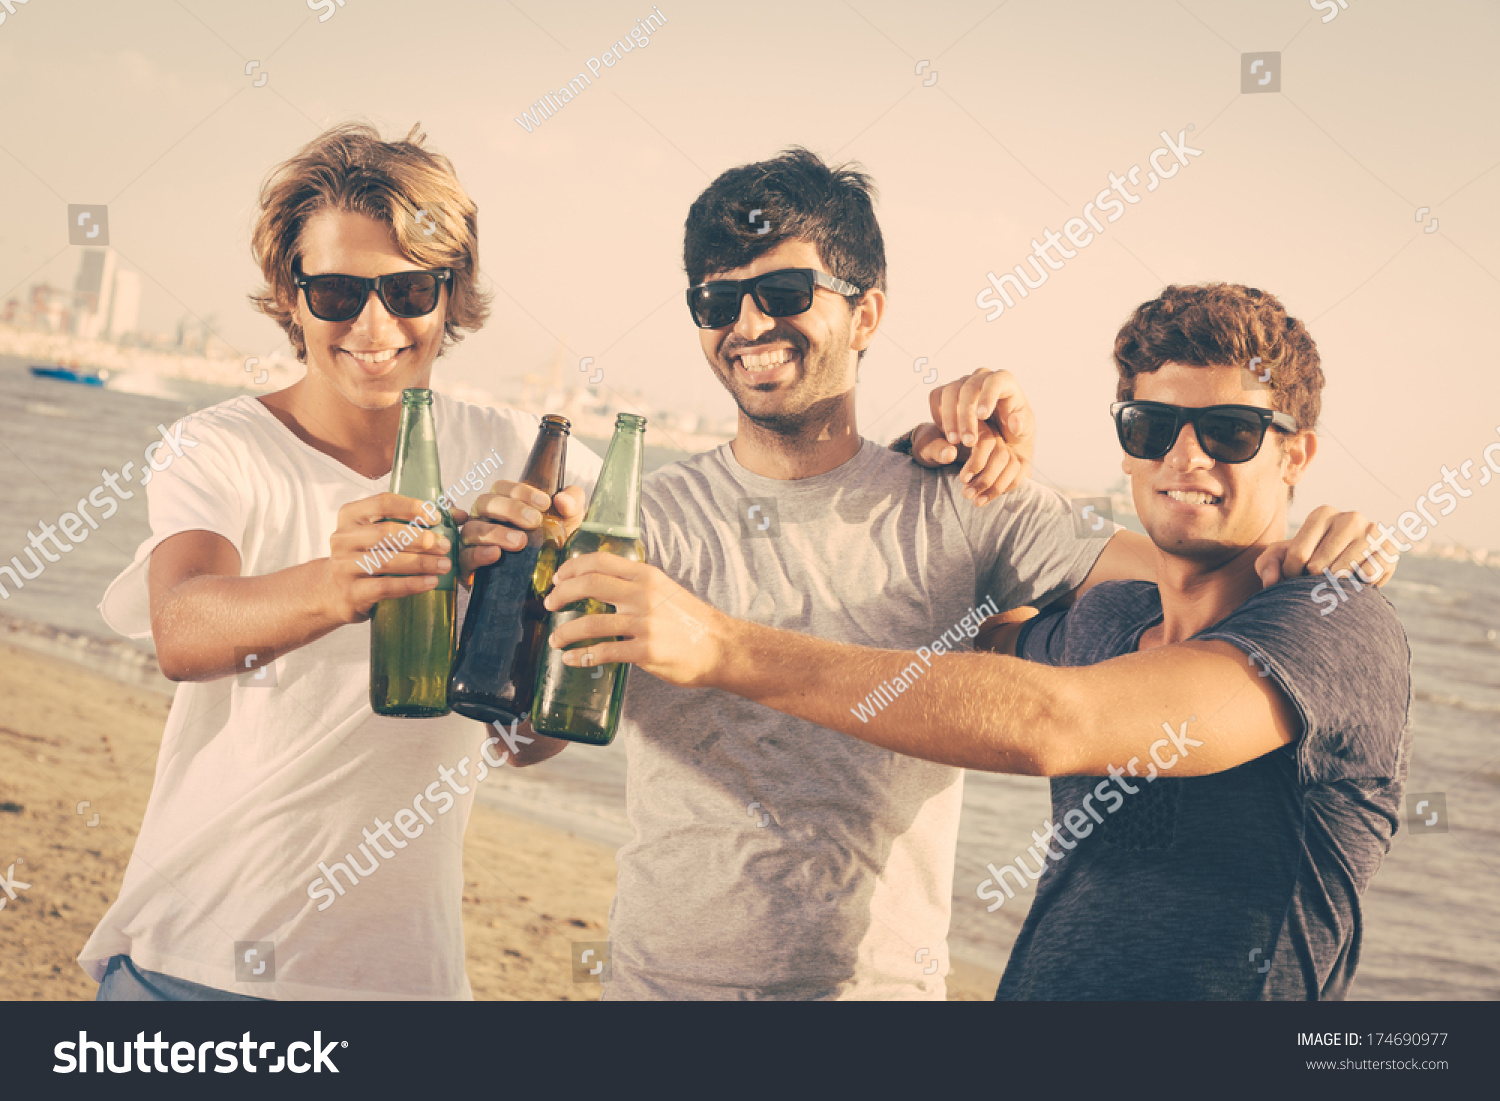 Group Of Boys Cheering At Beach Stock Photo 174690977 : Shutterstock